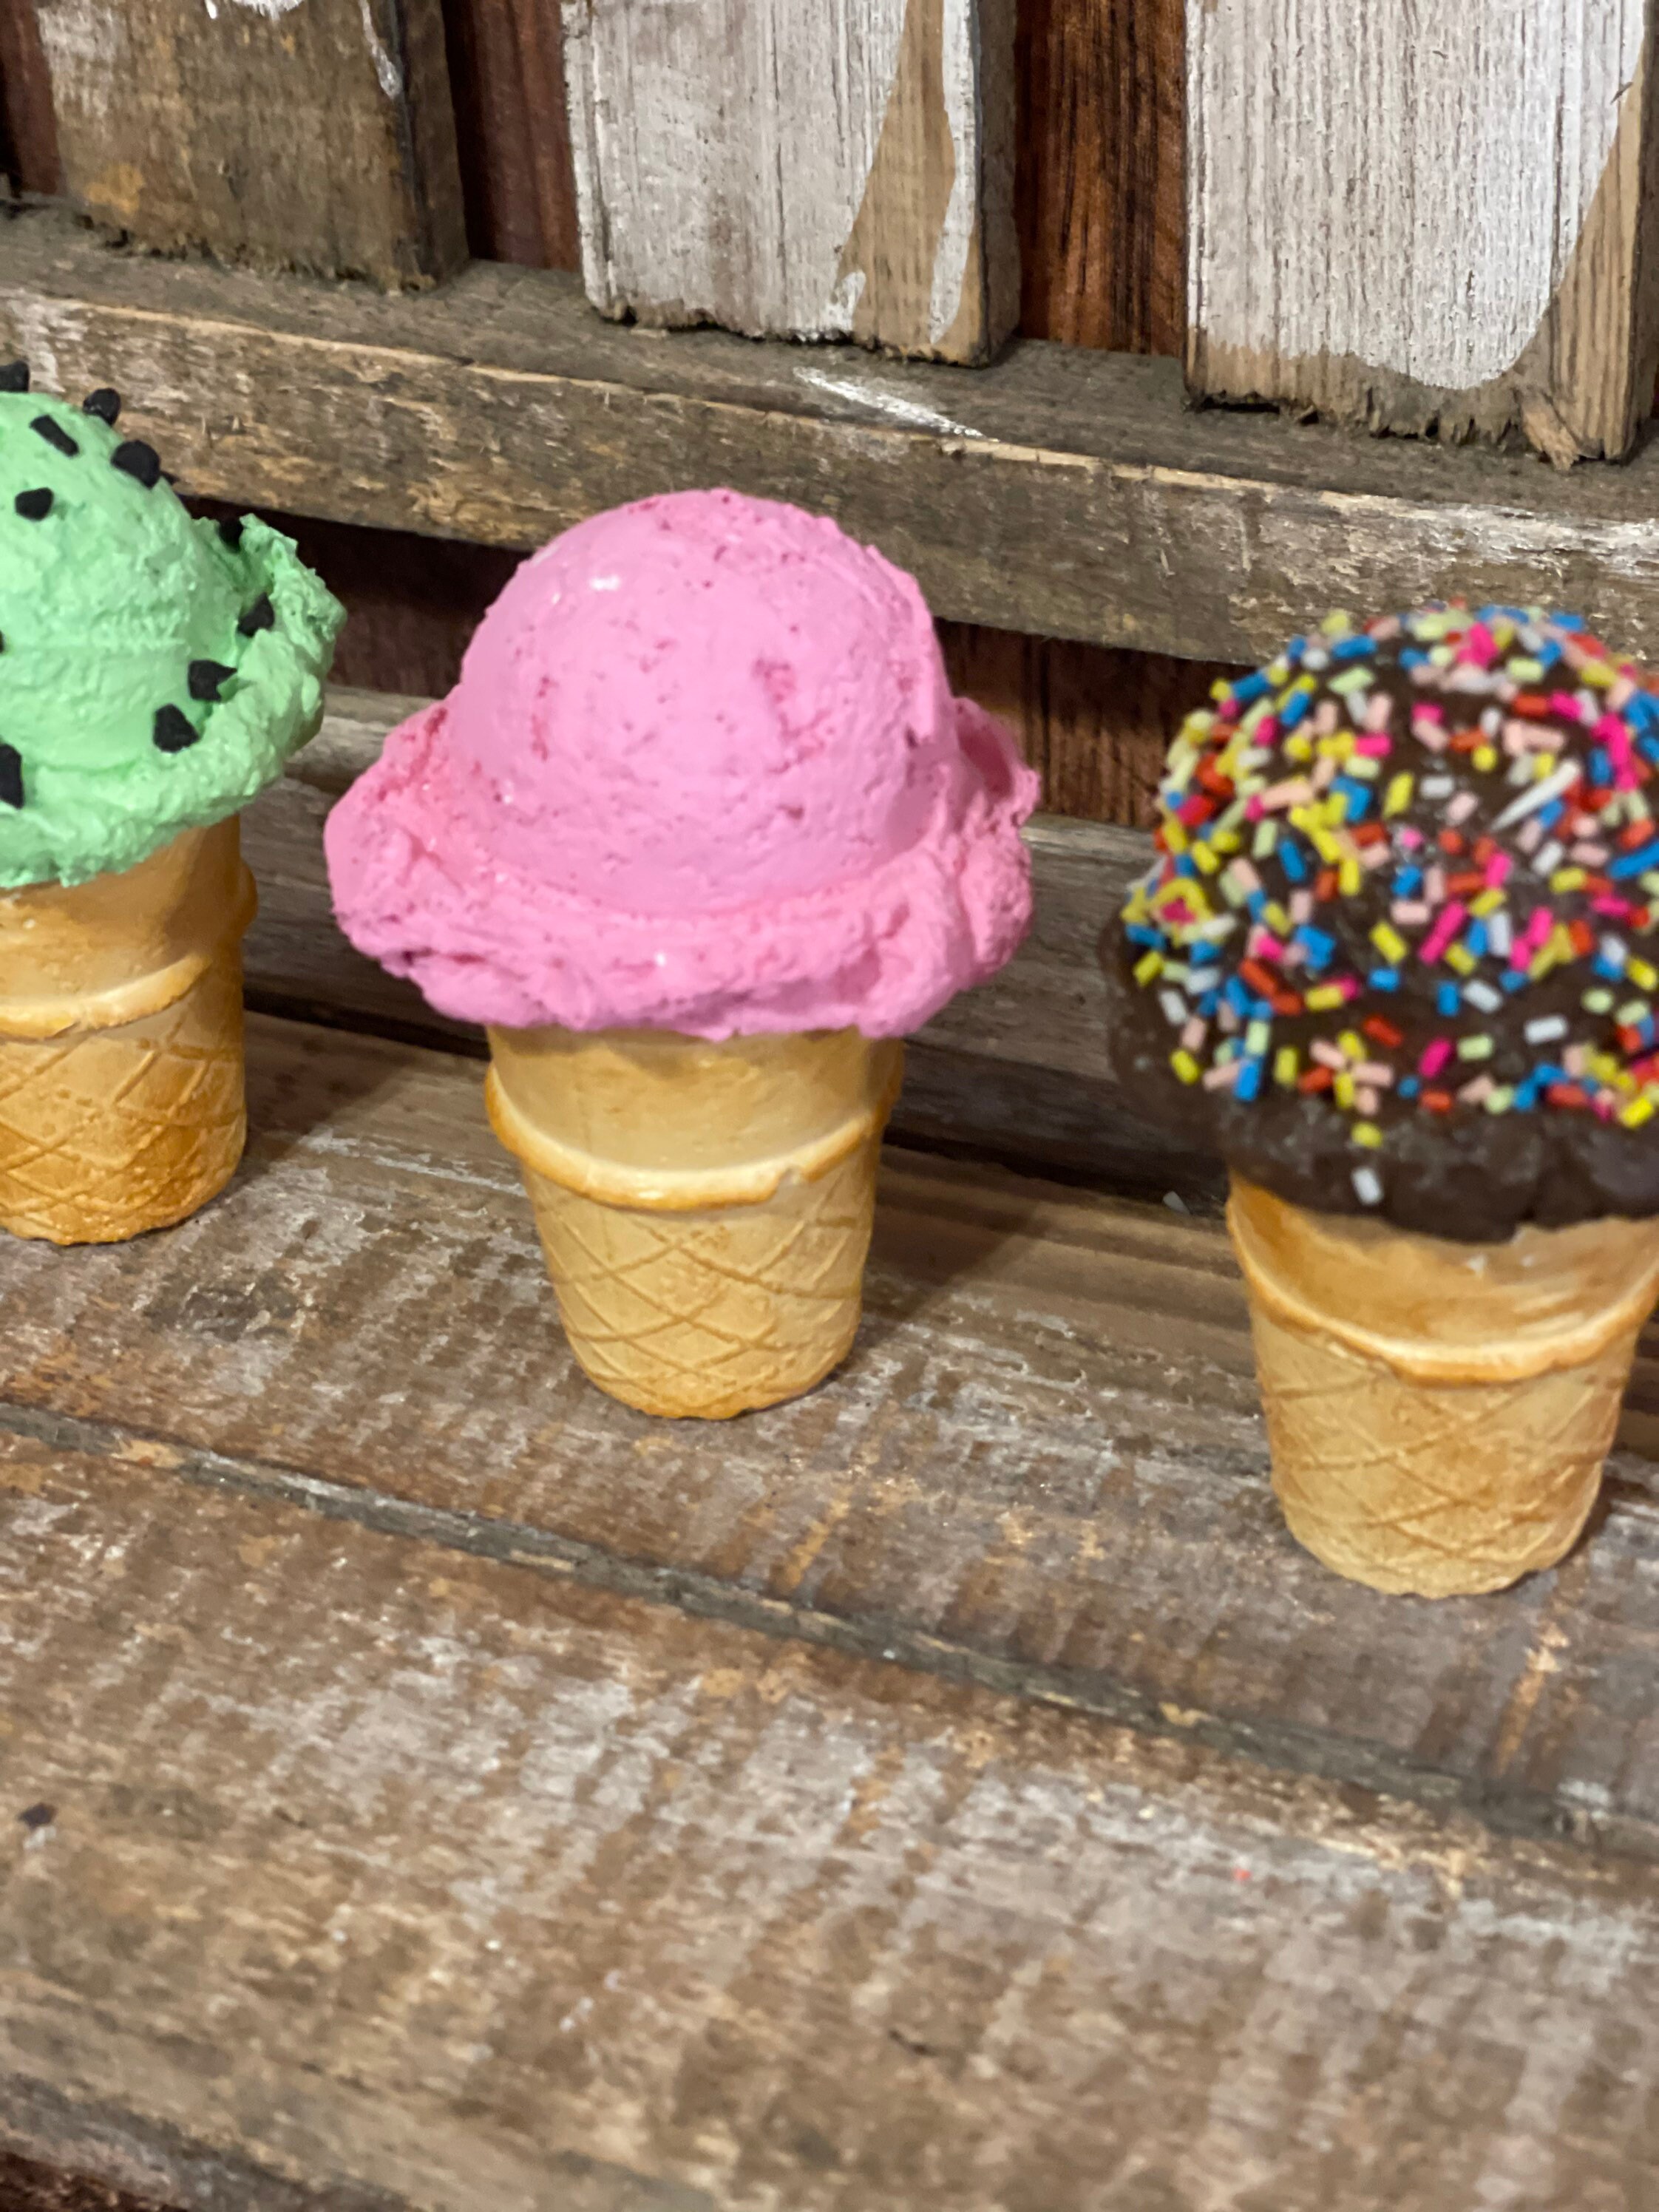 DIY Ice Cream Cone Serving Tray - Southern Revivals